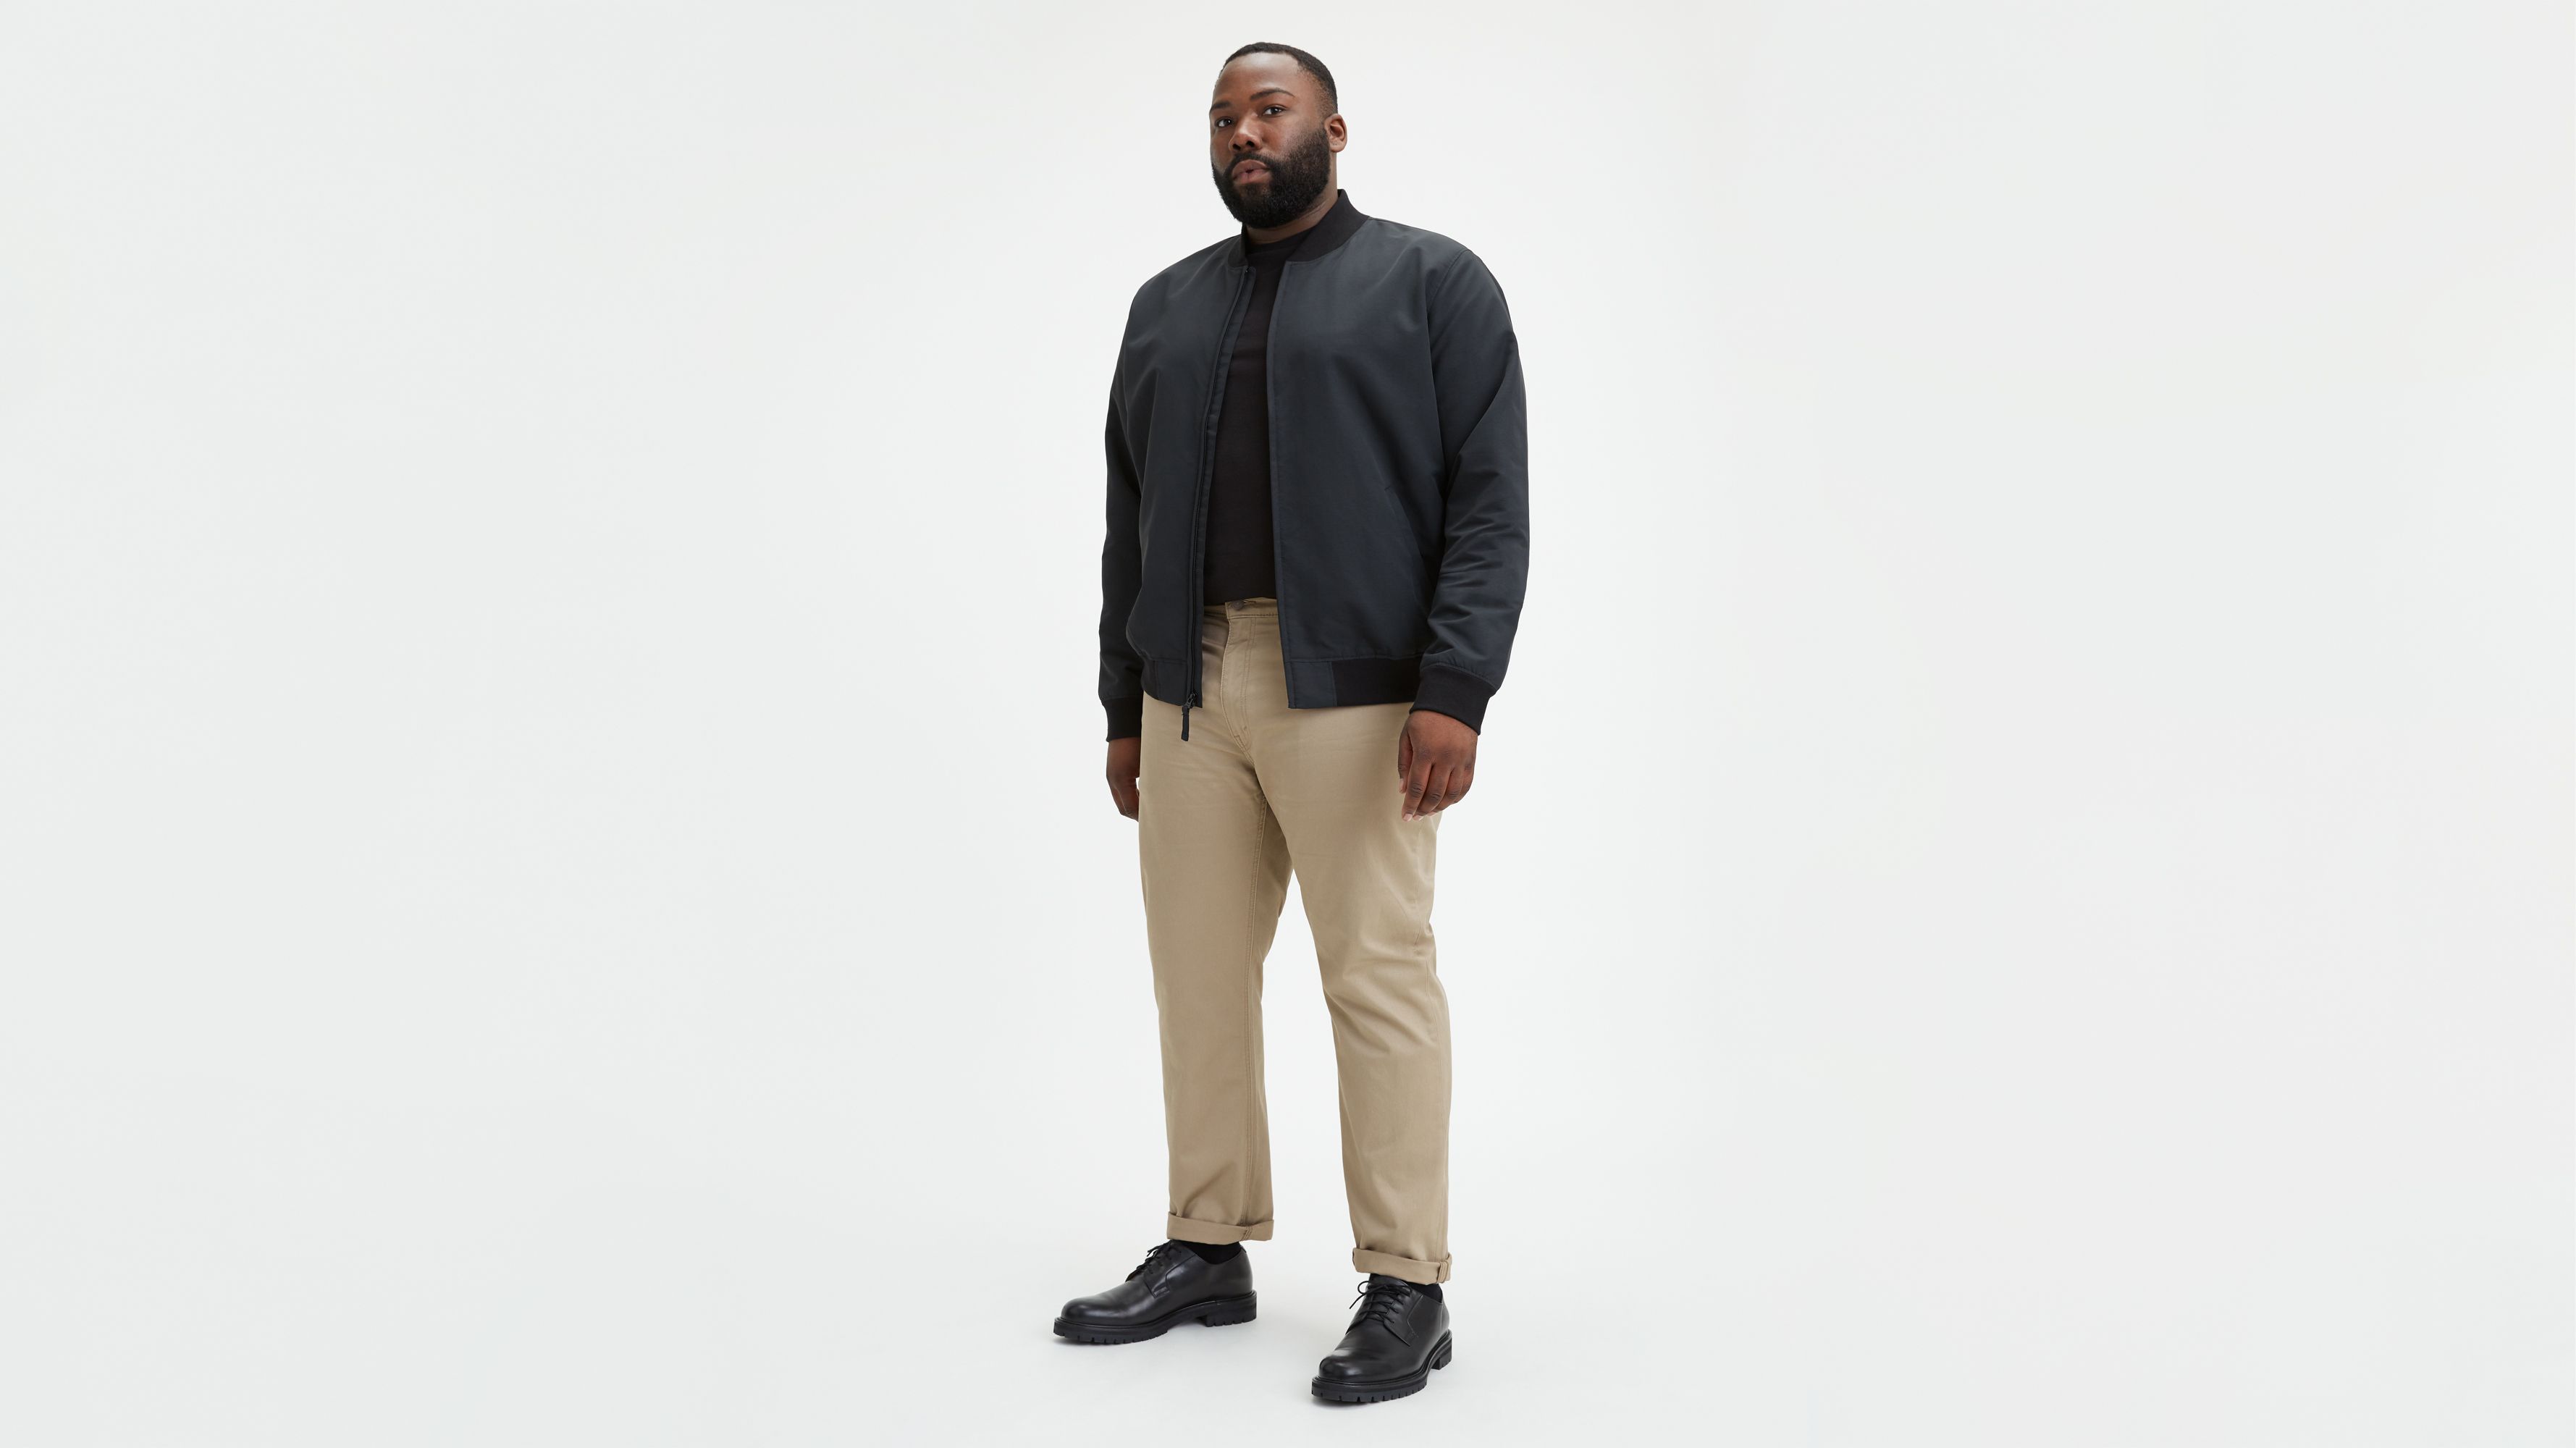 levi's athletic fit big and tall